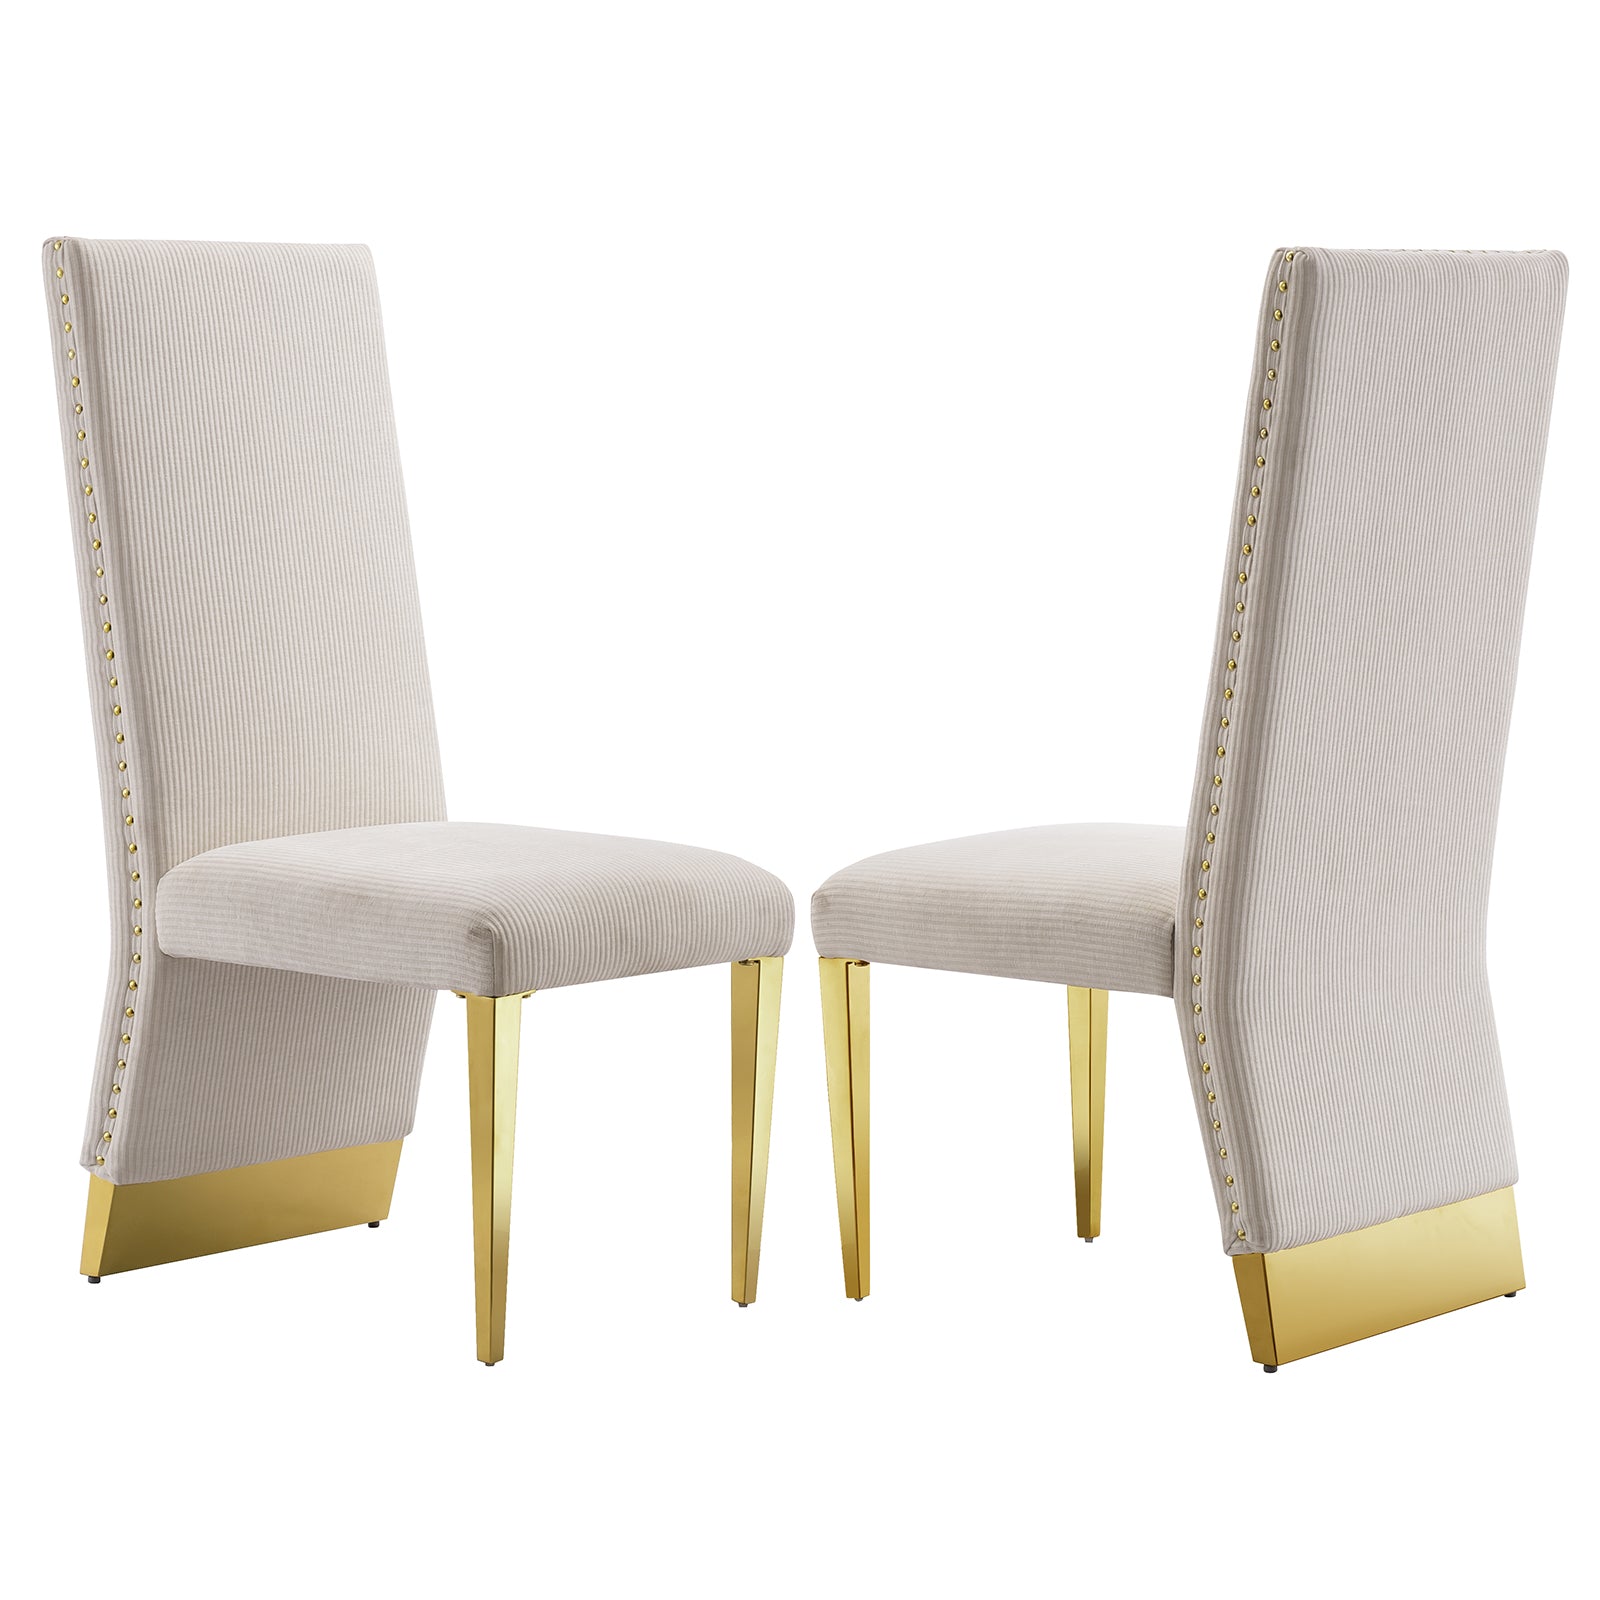 The Essence of Elegance: Beige Fabric Dining Chairs